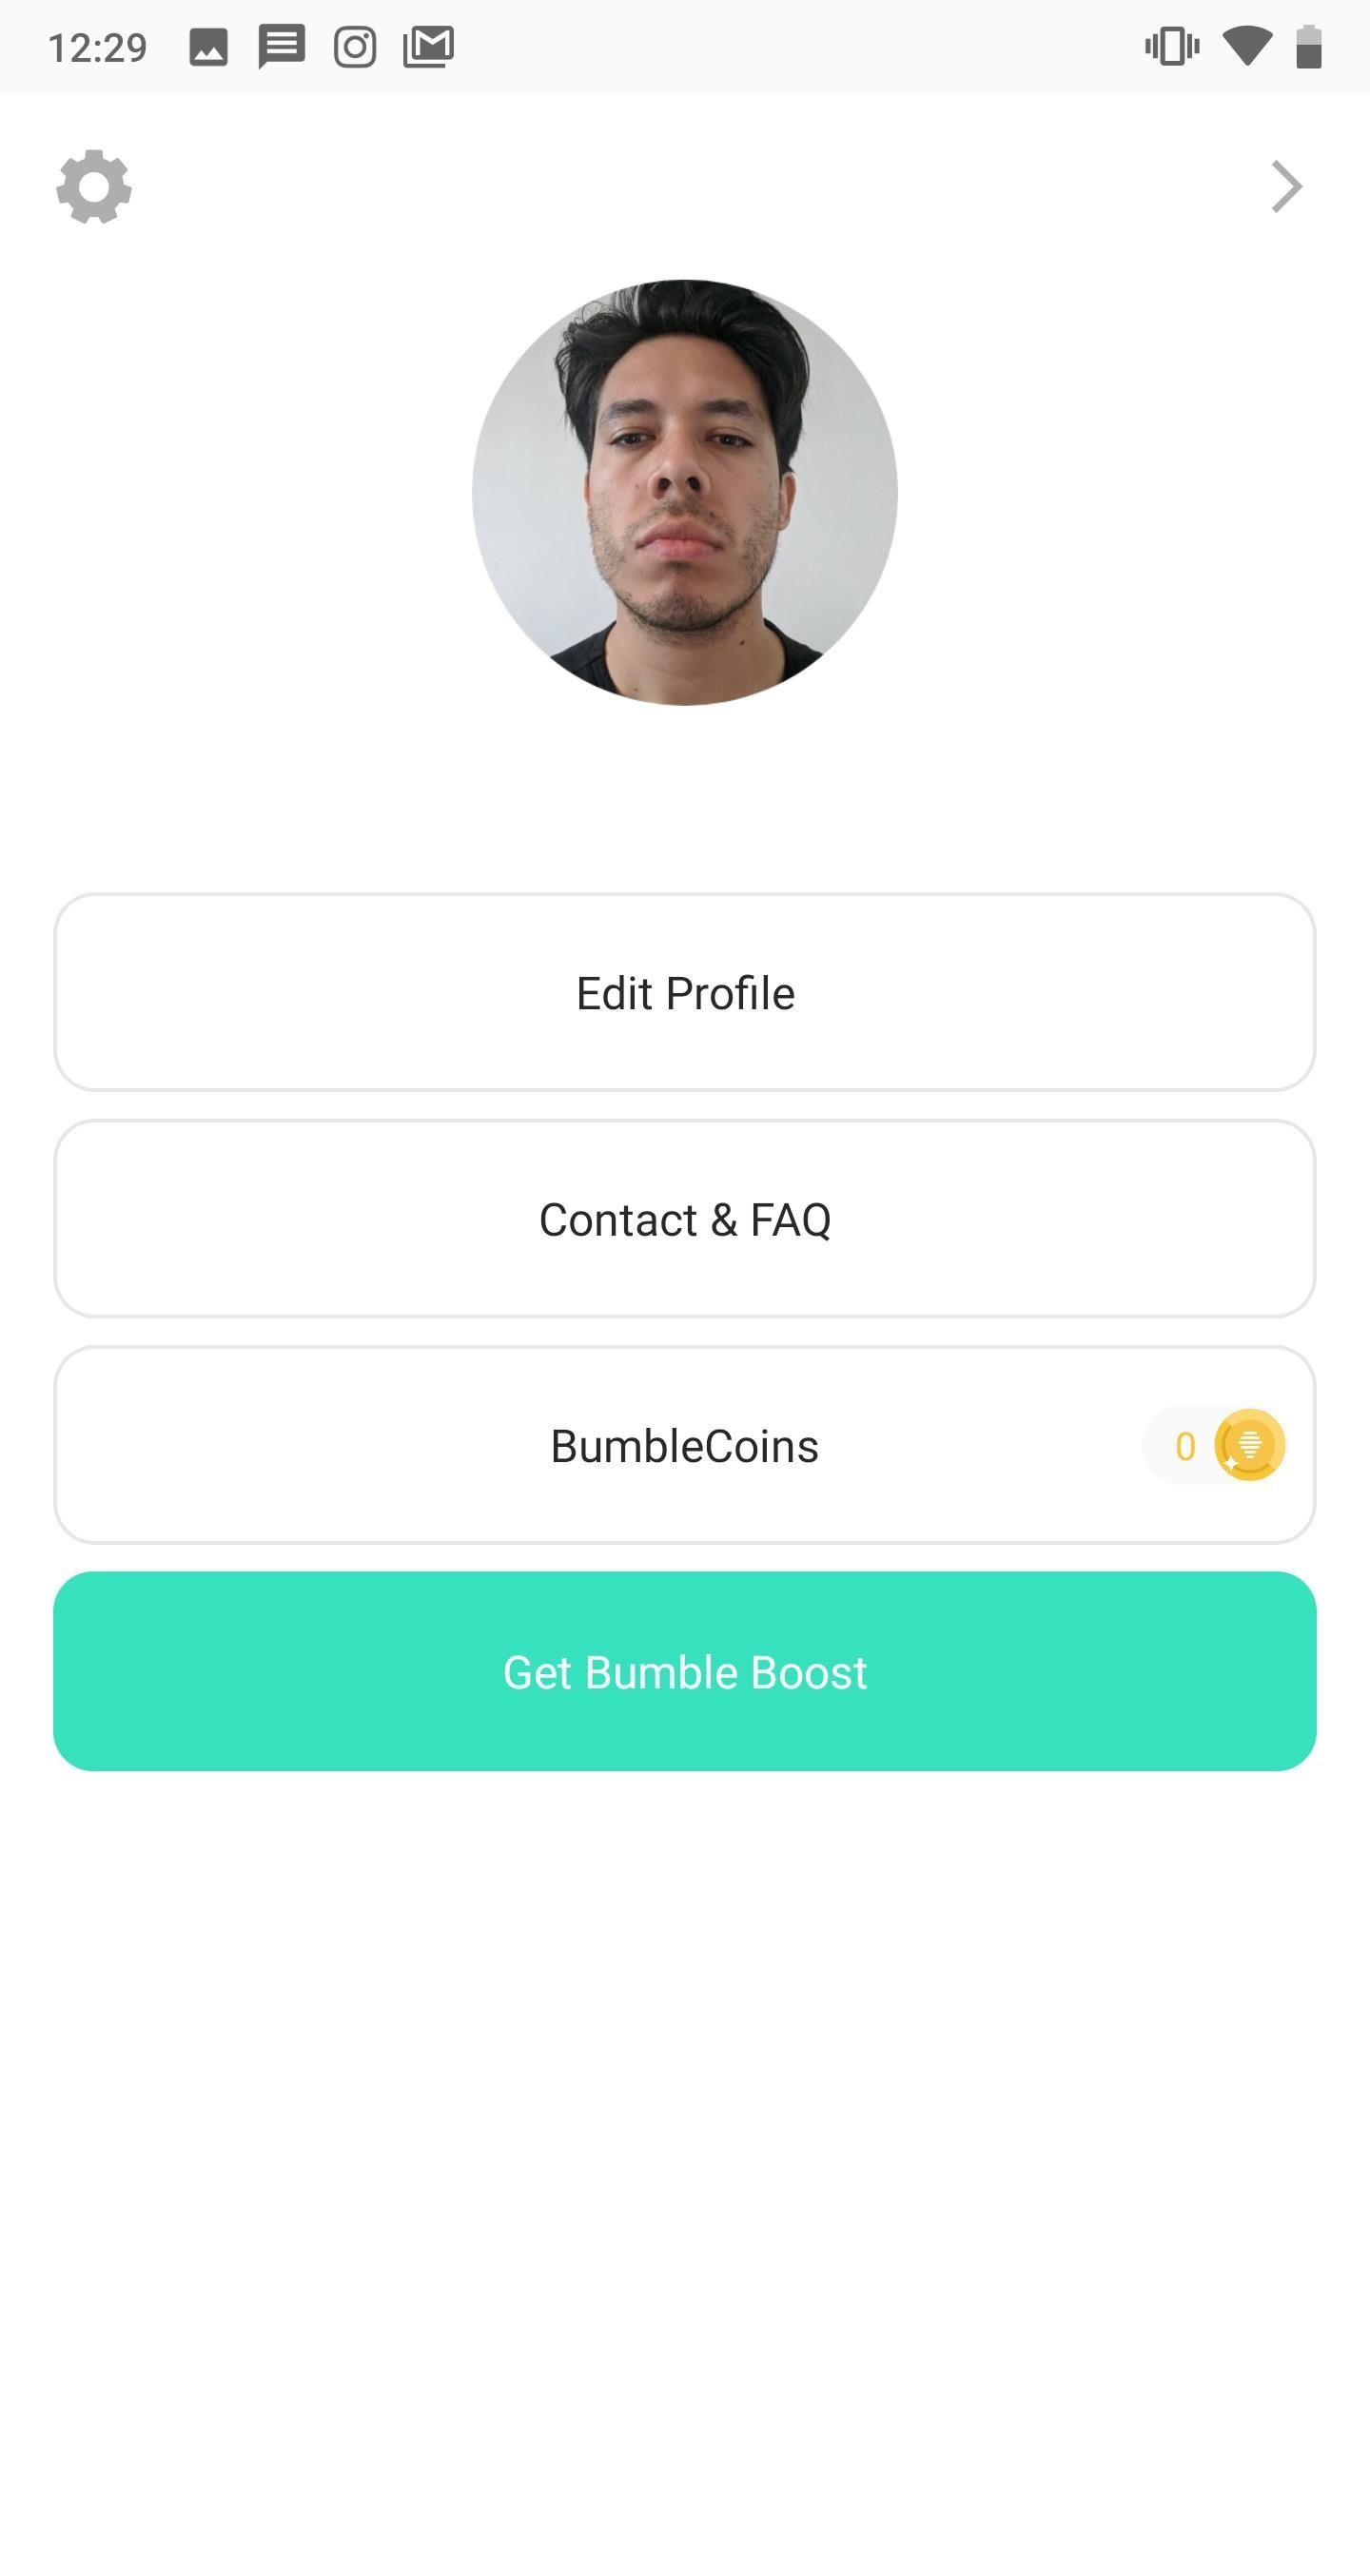 How to Verify Your Bumble Account to Help Fight Catfishing